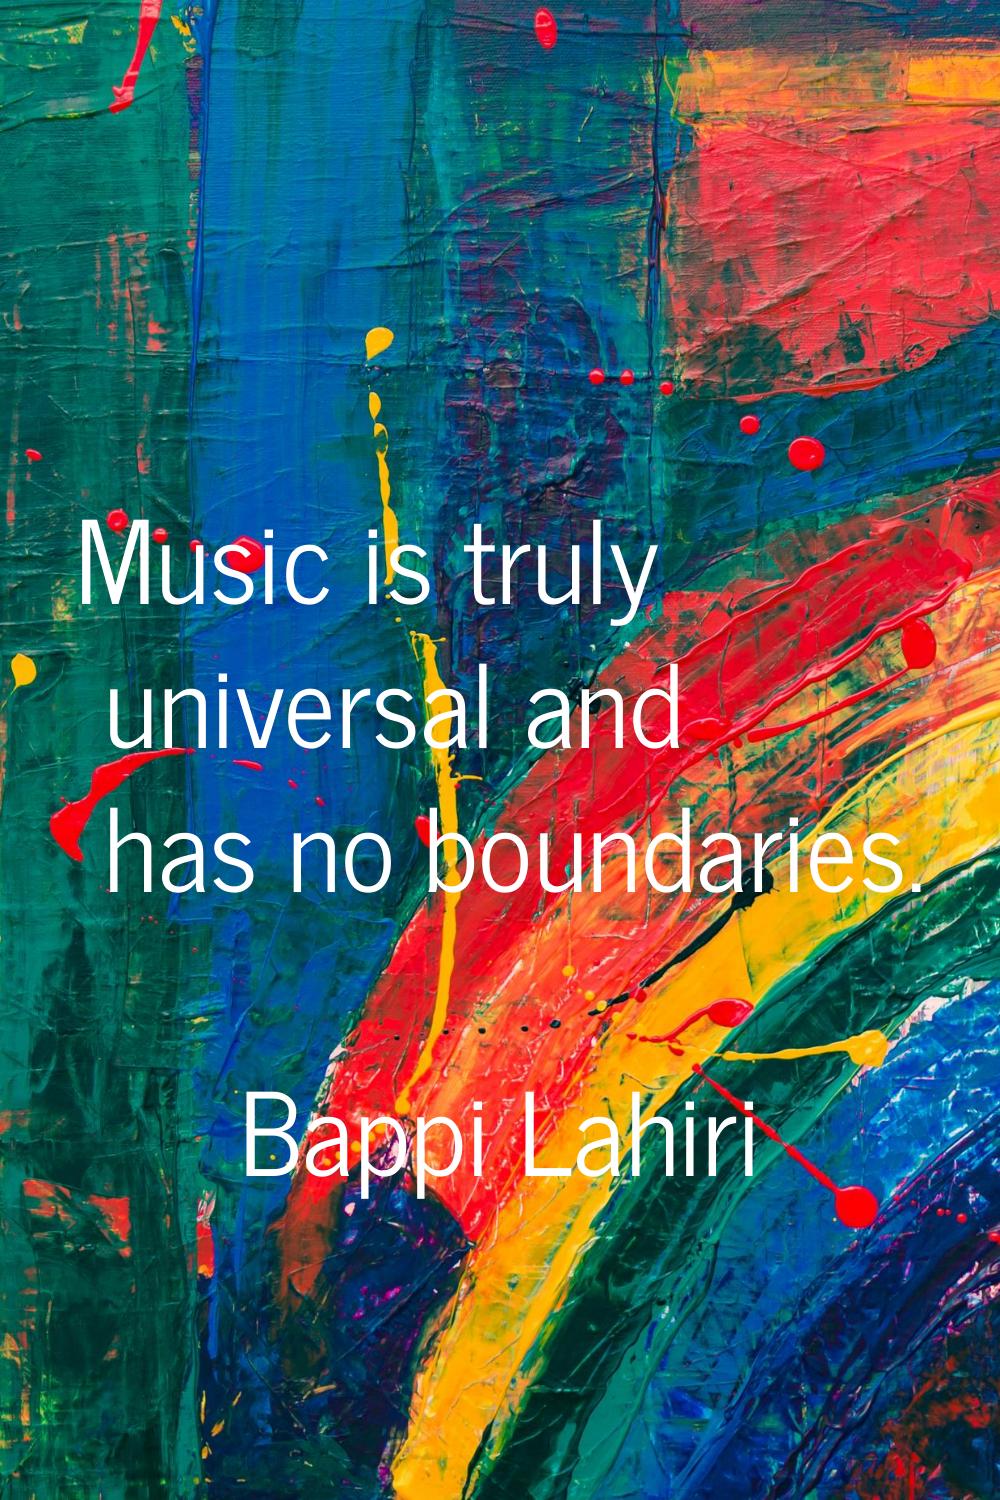 Music is truly universal and has no boundaries.